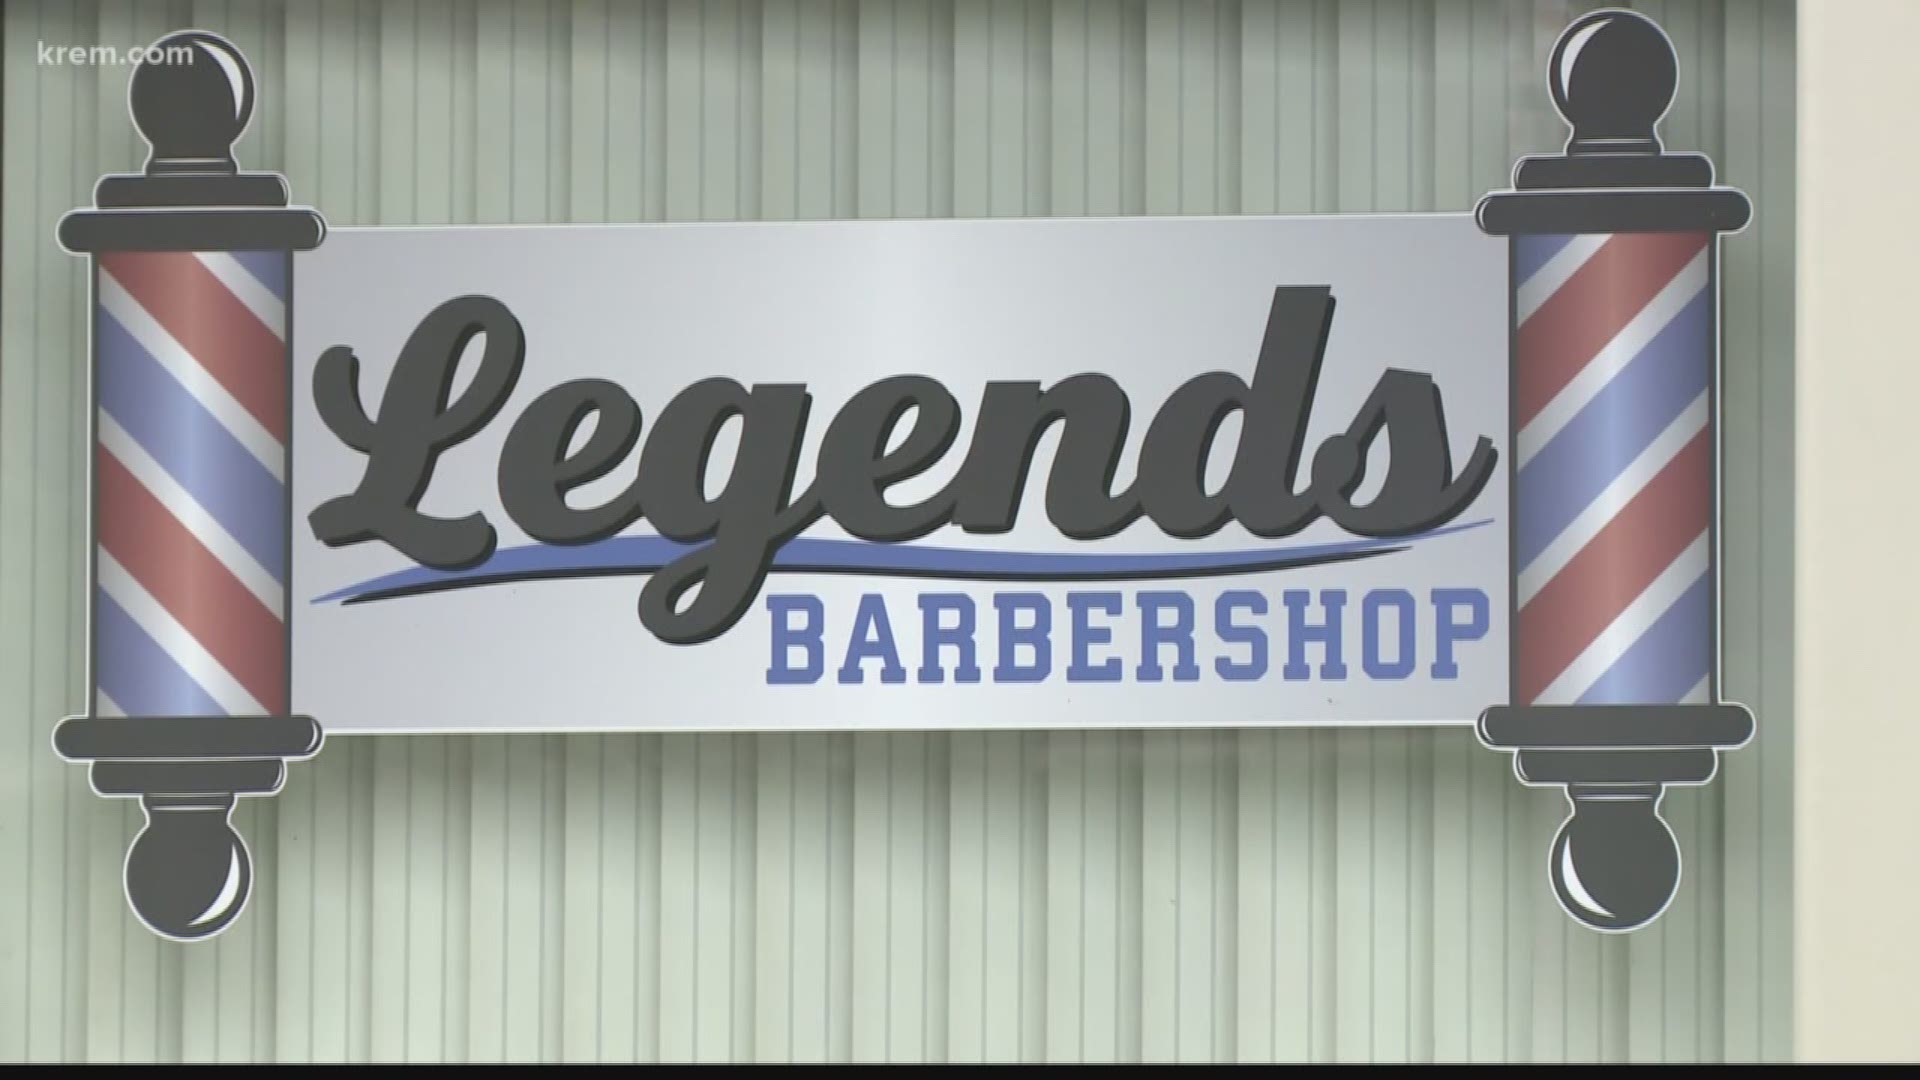 Whitman County was approved to move to Phase 2 last week, which meant restaurants and barbershops could welcome customers back through their doors.